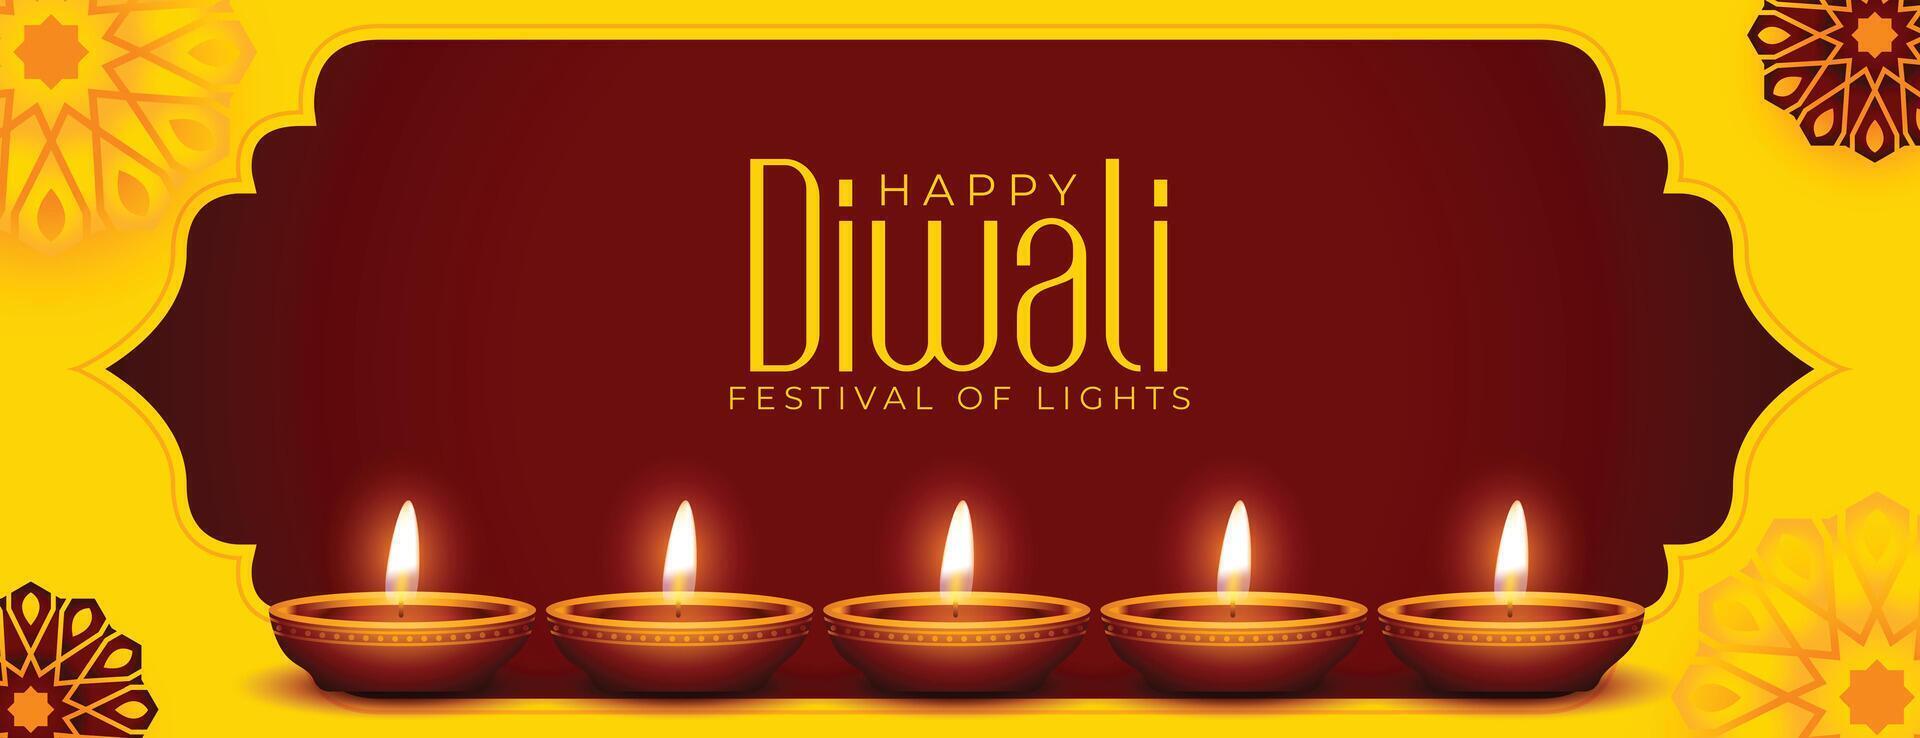 happy diwali banner with diya and floral background design vector